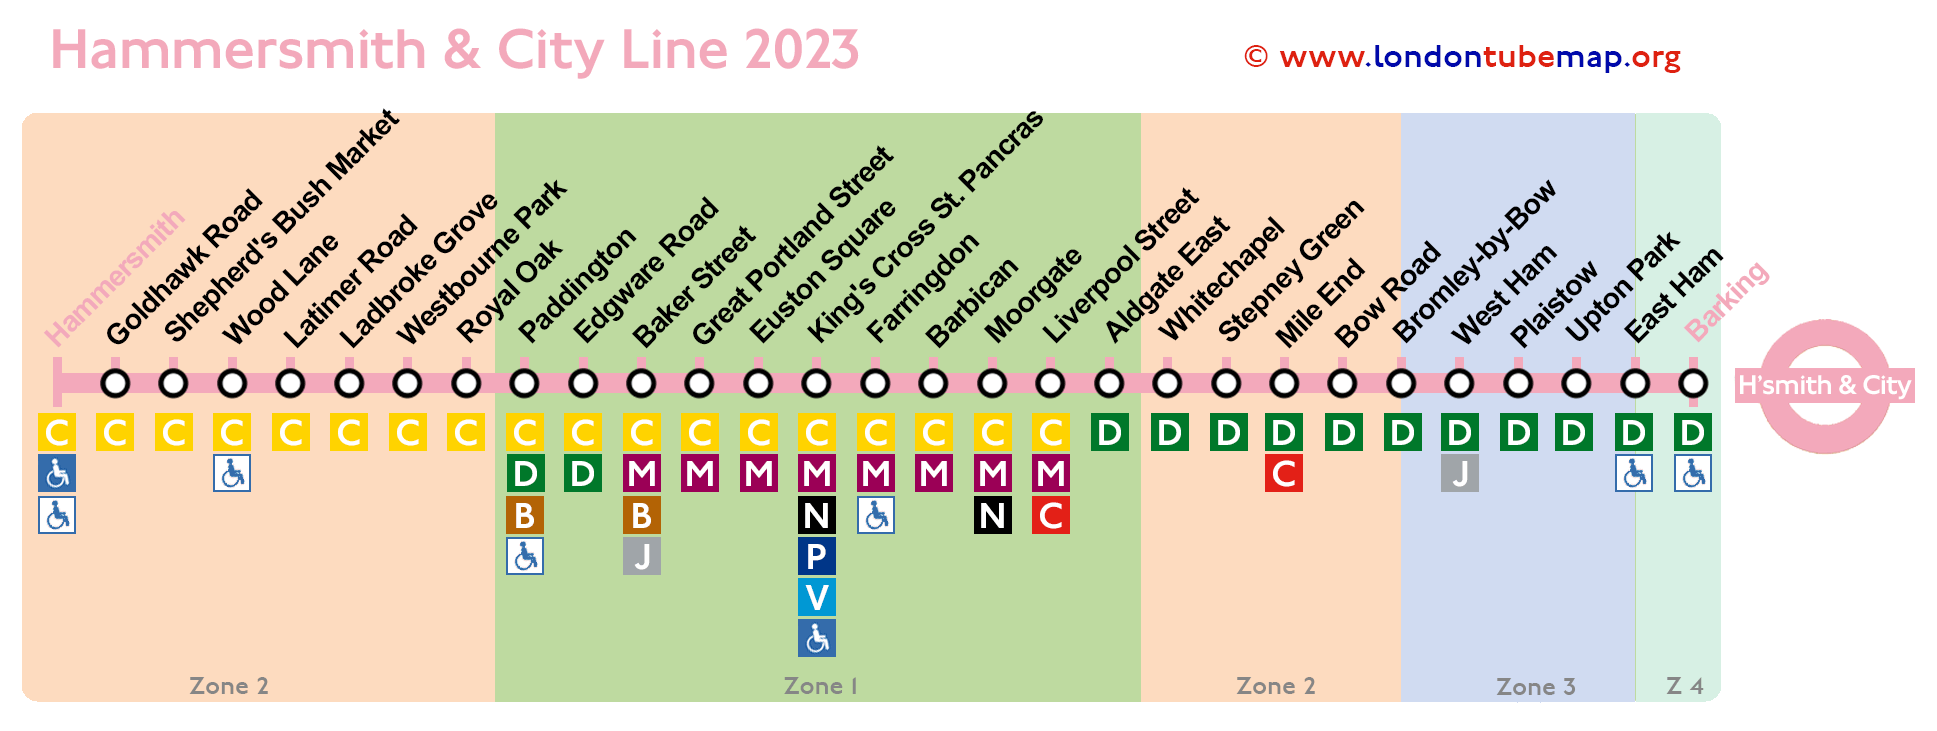 Hammersmith and City line map 2023